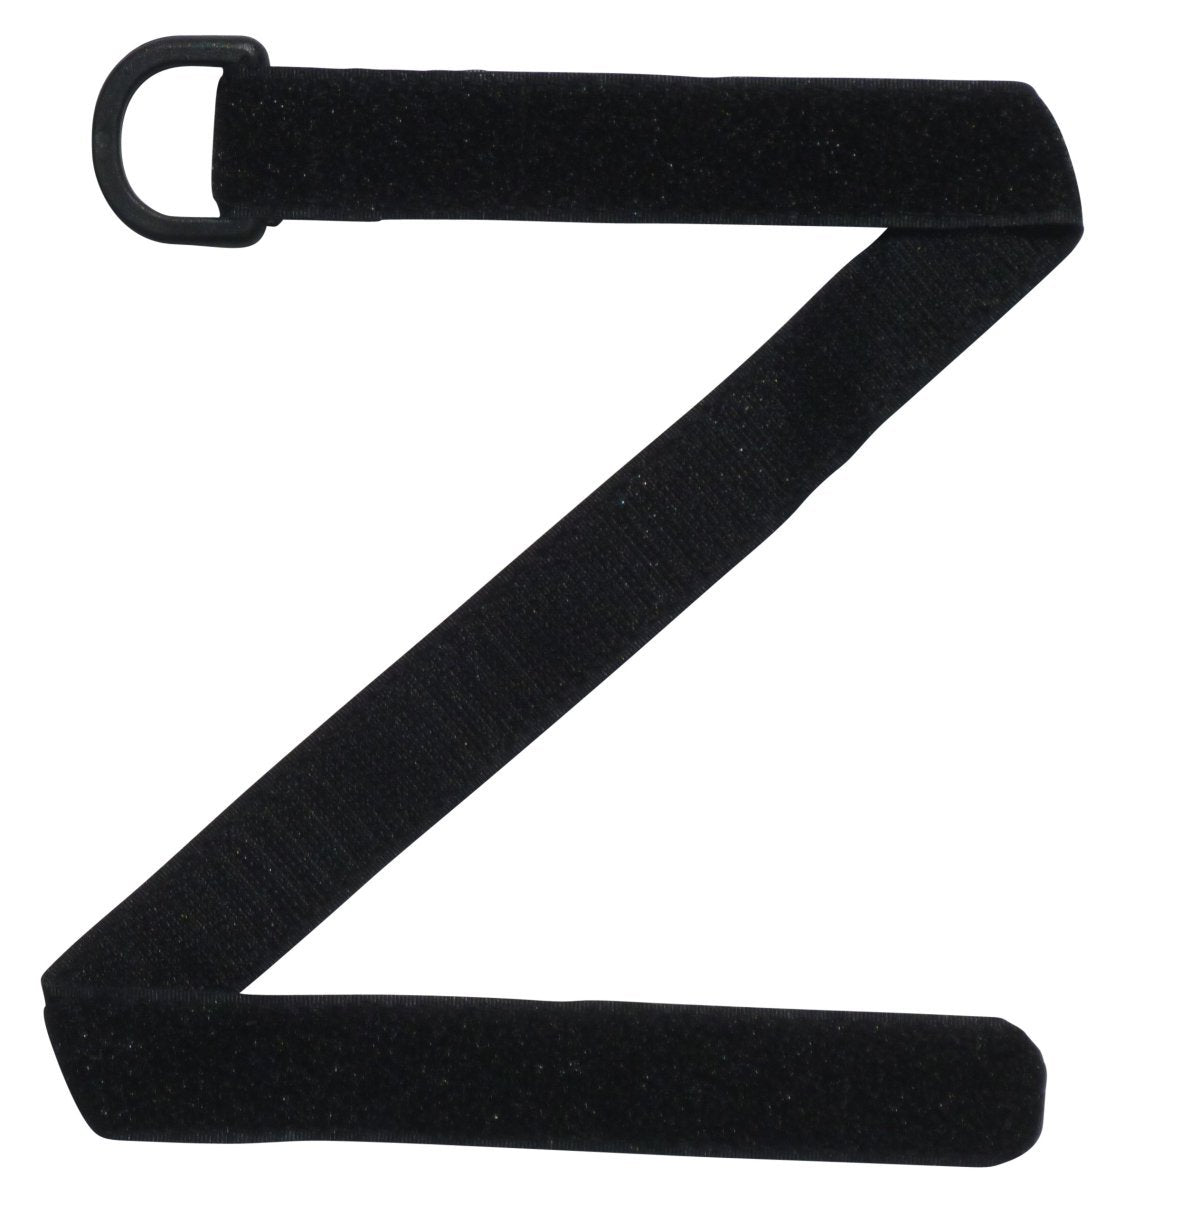 Benristraps 25mm back to back hook & loop strap in black with D ring (pair) 